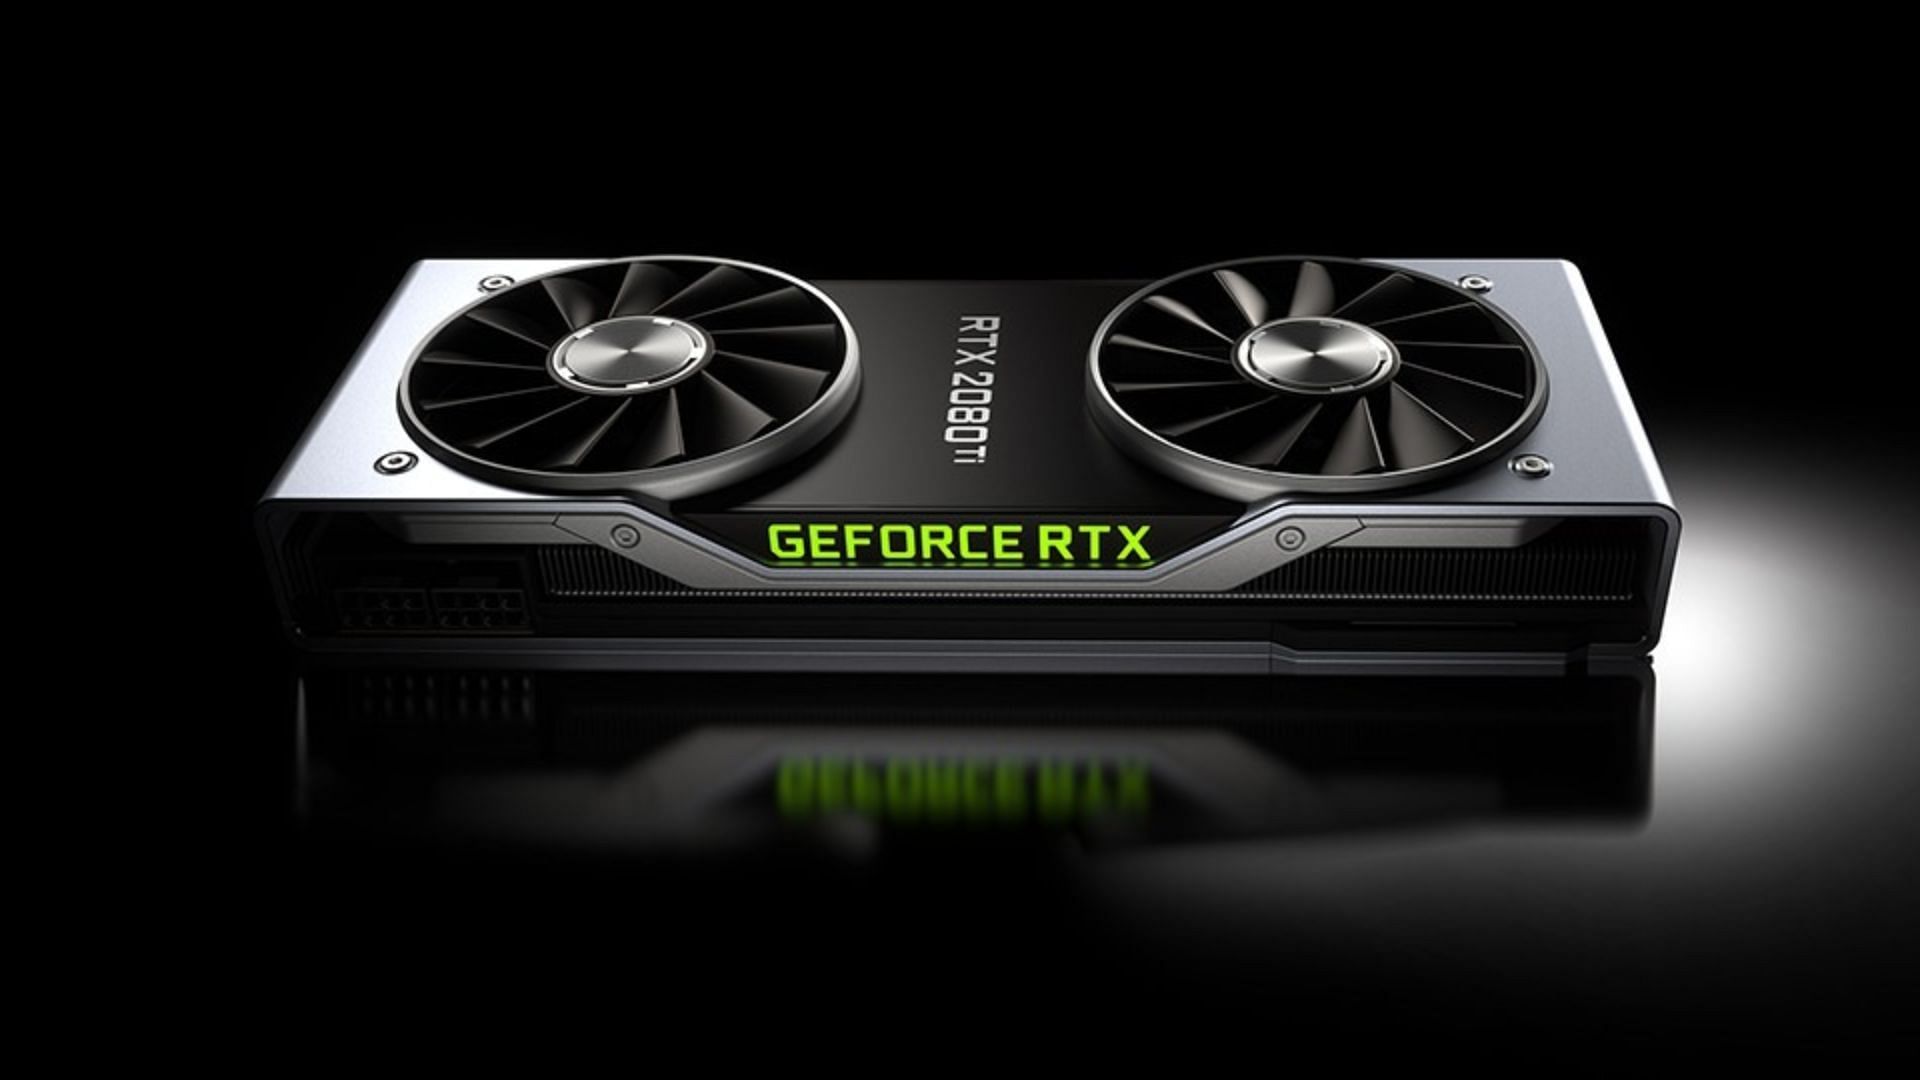 Is RTX 2080 Ti good for gaming?